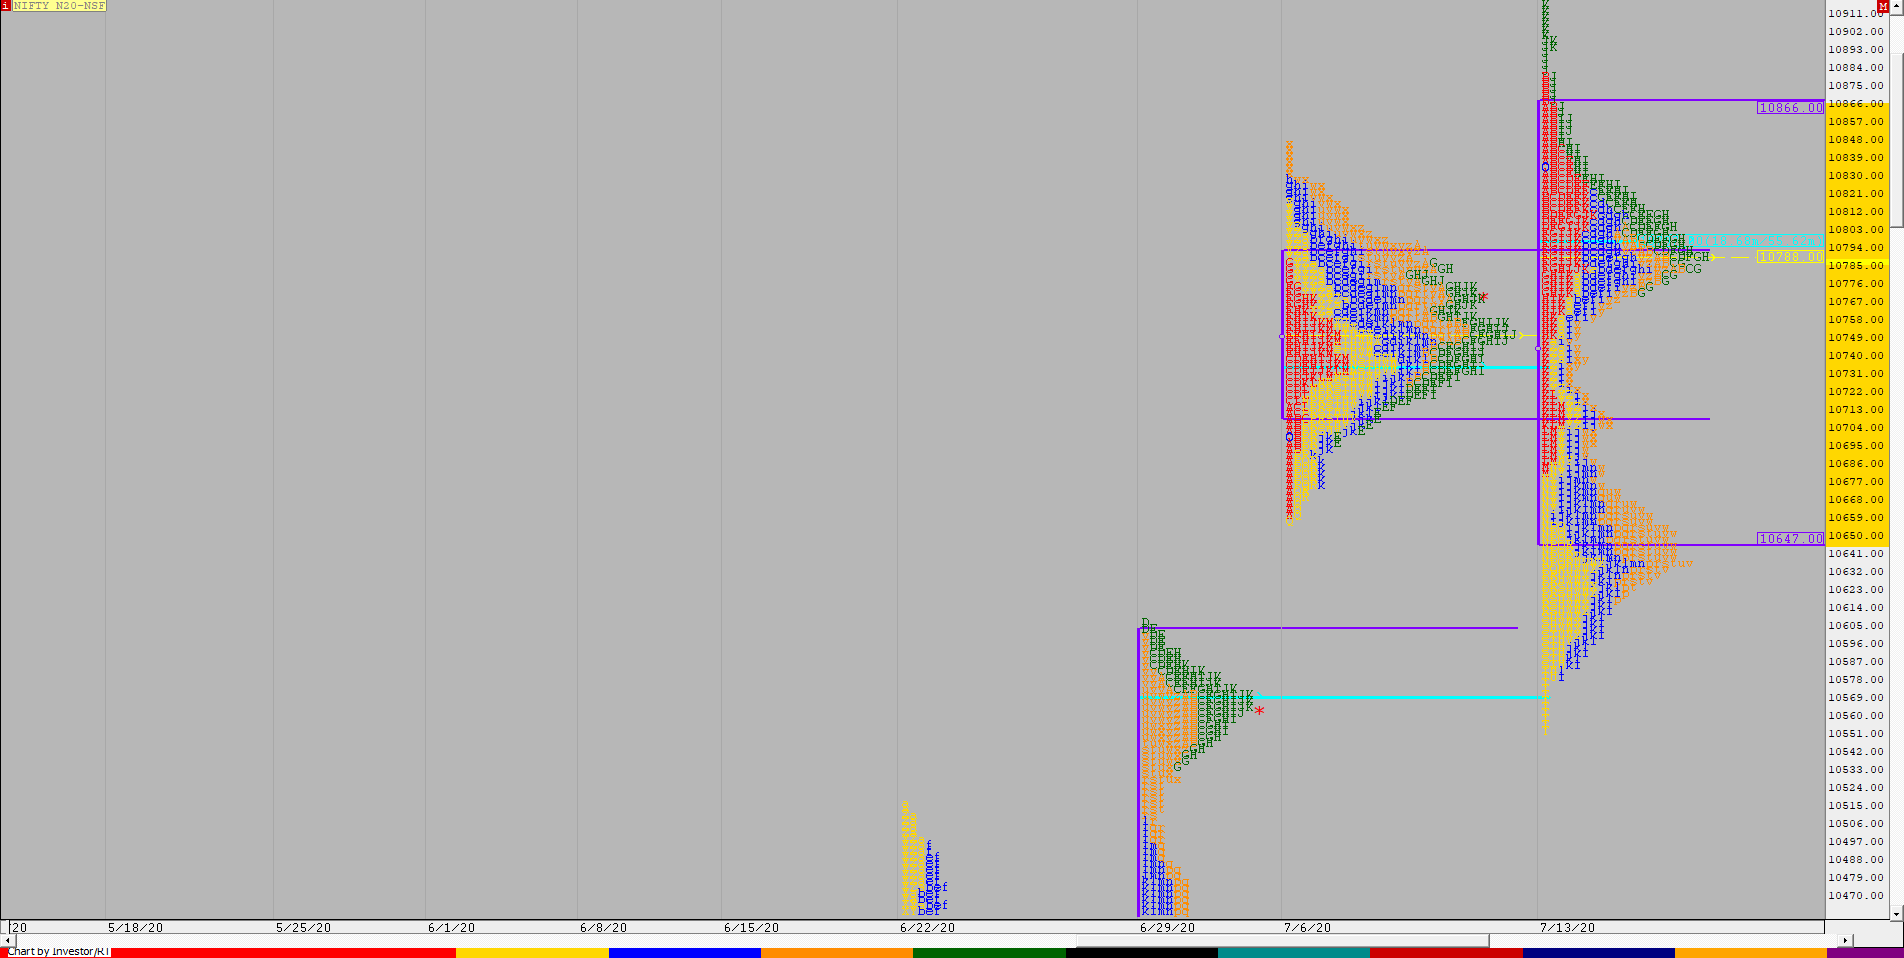 Nf F 2 Weekly Charts (13Th To 17Th July 2020) And Market Profile Analysis Banknifty Futures, Charts, Day Trading, Intraday Trading, Intraday Trading Strategies, Market Profile, Market Profile Trading Strategies, Nifty Futures, Order Flow Analysis, Support And Resistance, Technical Analysis, Trading Strategies, Volume Profile Trading